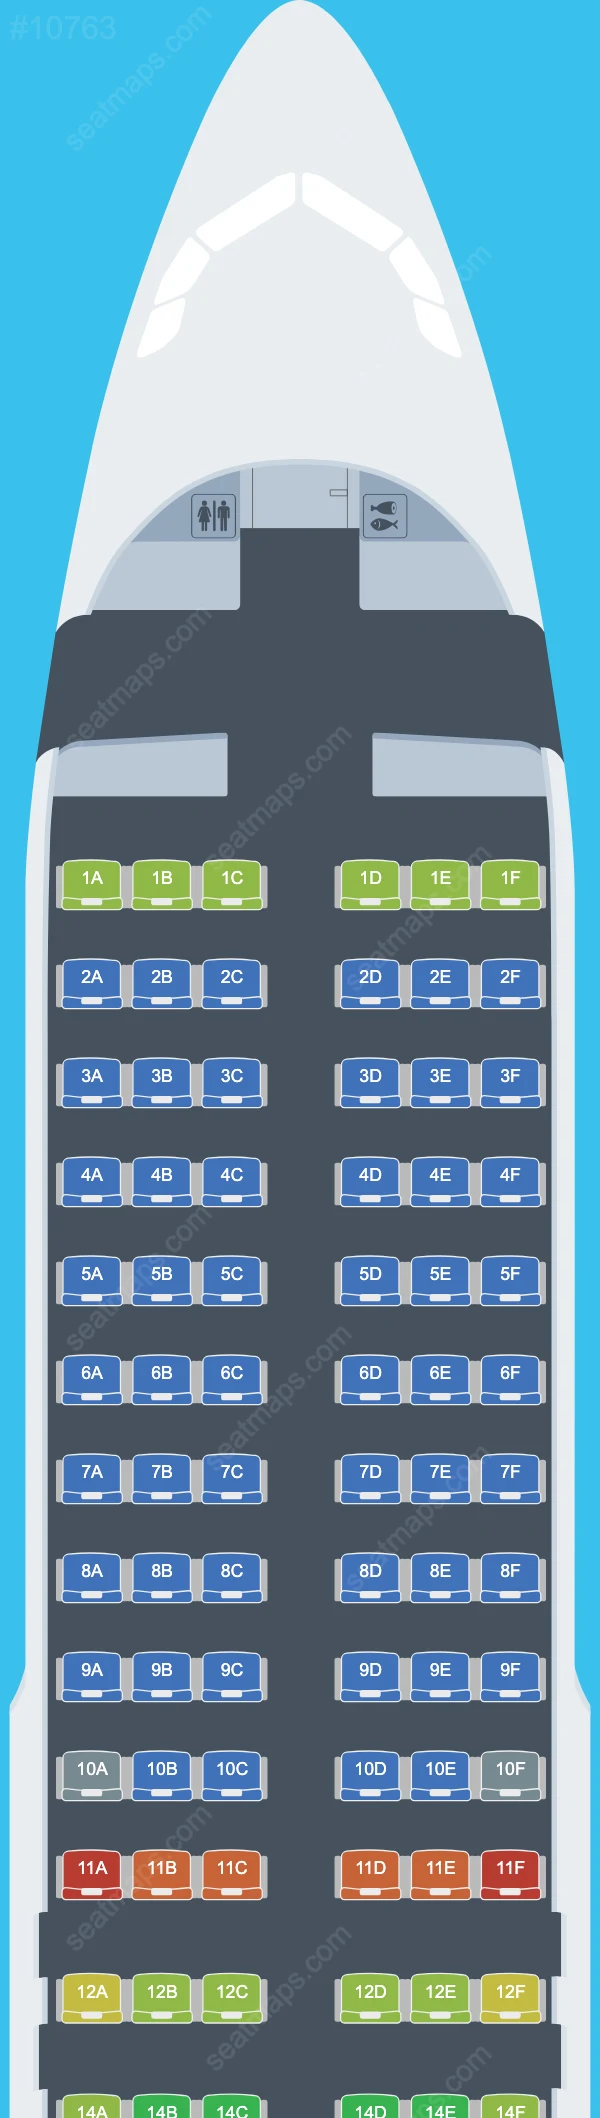 Flyadeal Airbus A320 Seat Maps A320-200neo